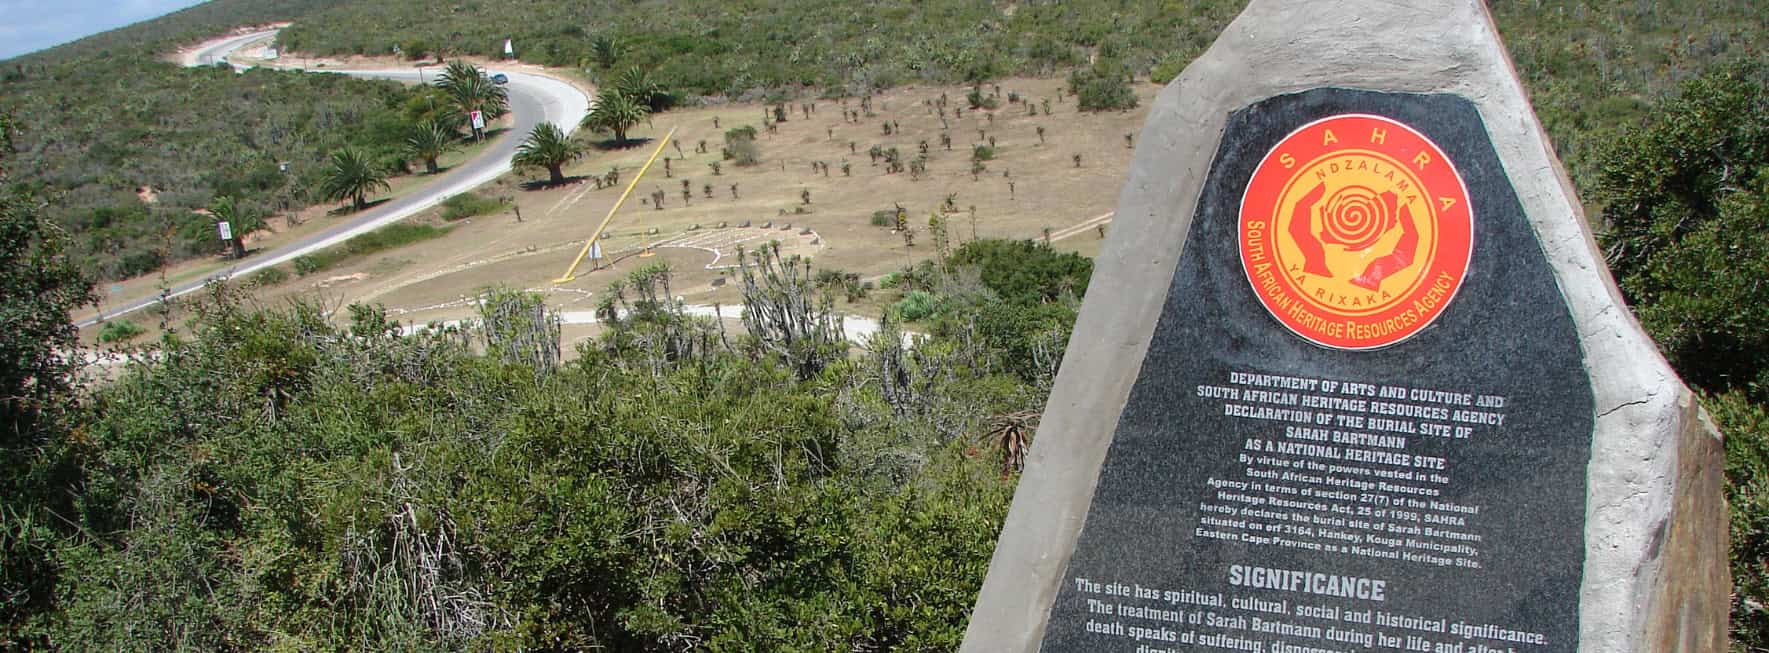 A grey memorial stone sits at the top of a hill. The plaque describes that the stone was erected in the memory of Sara Baartman.